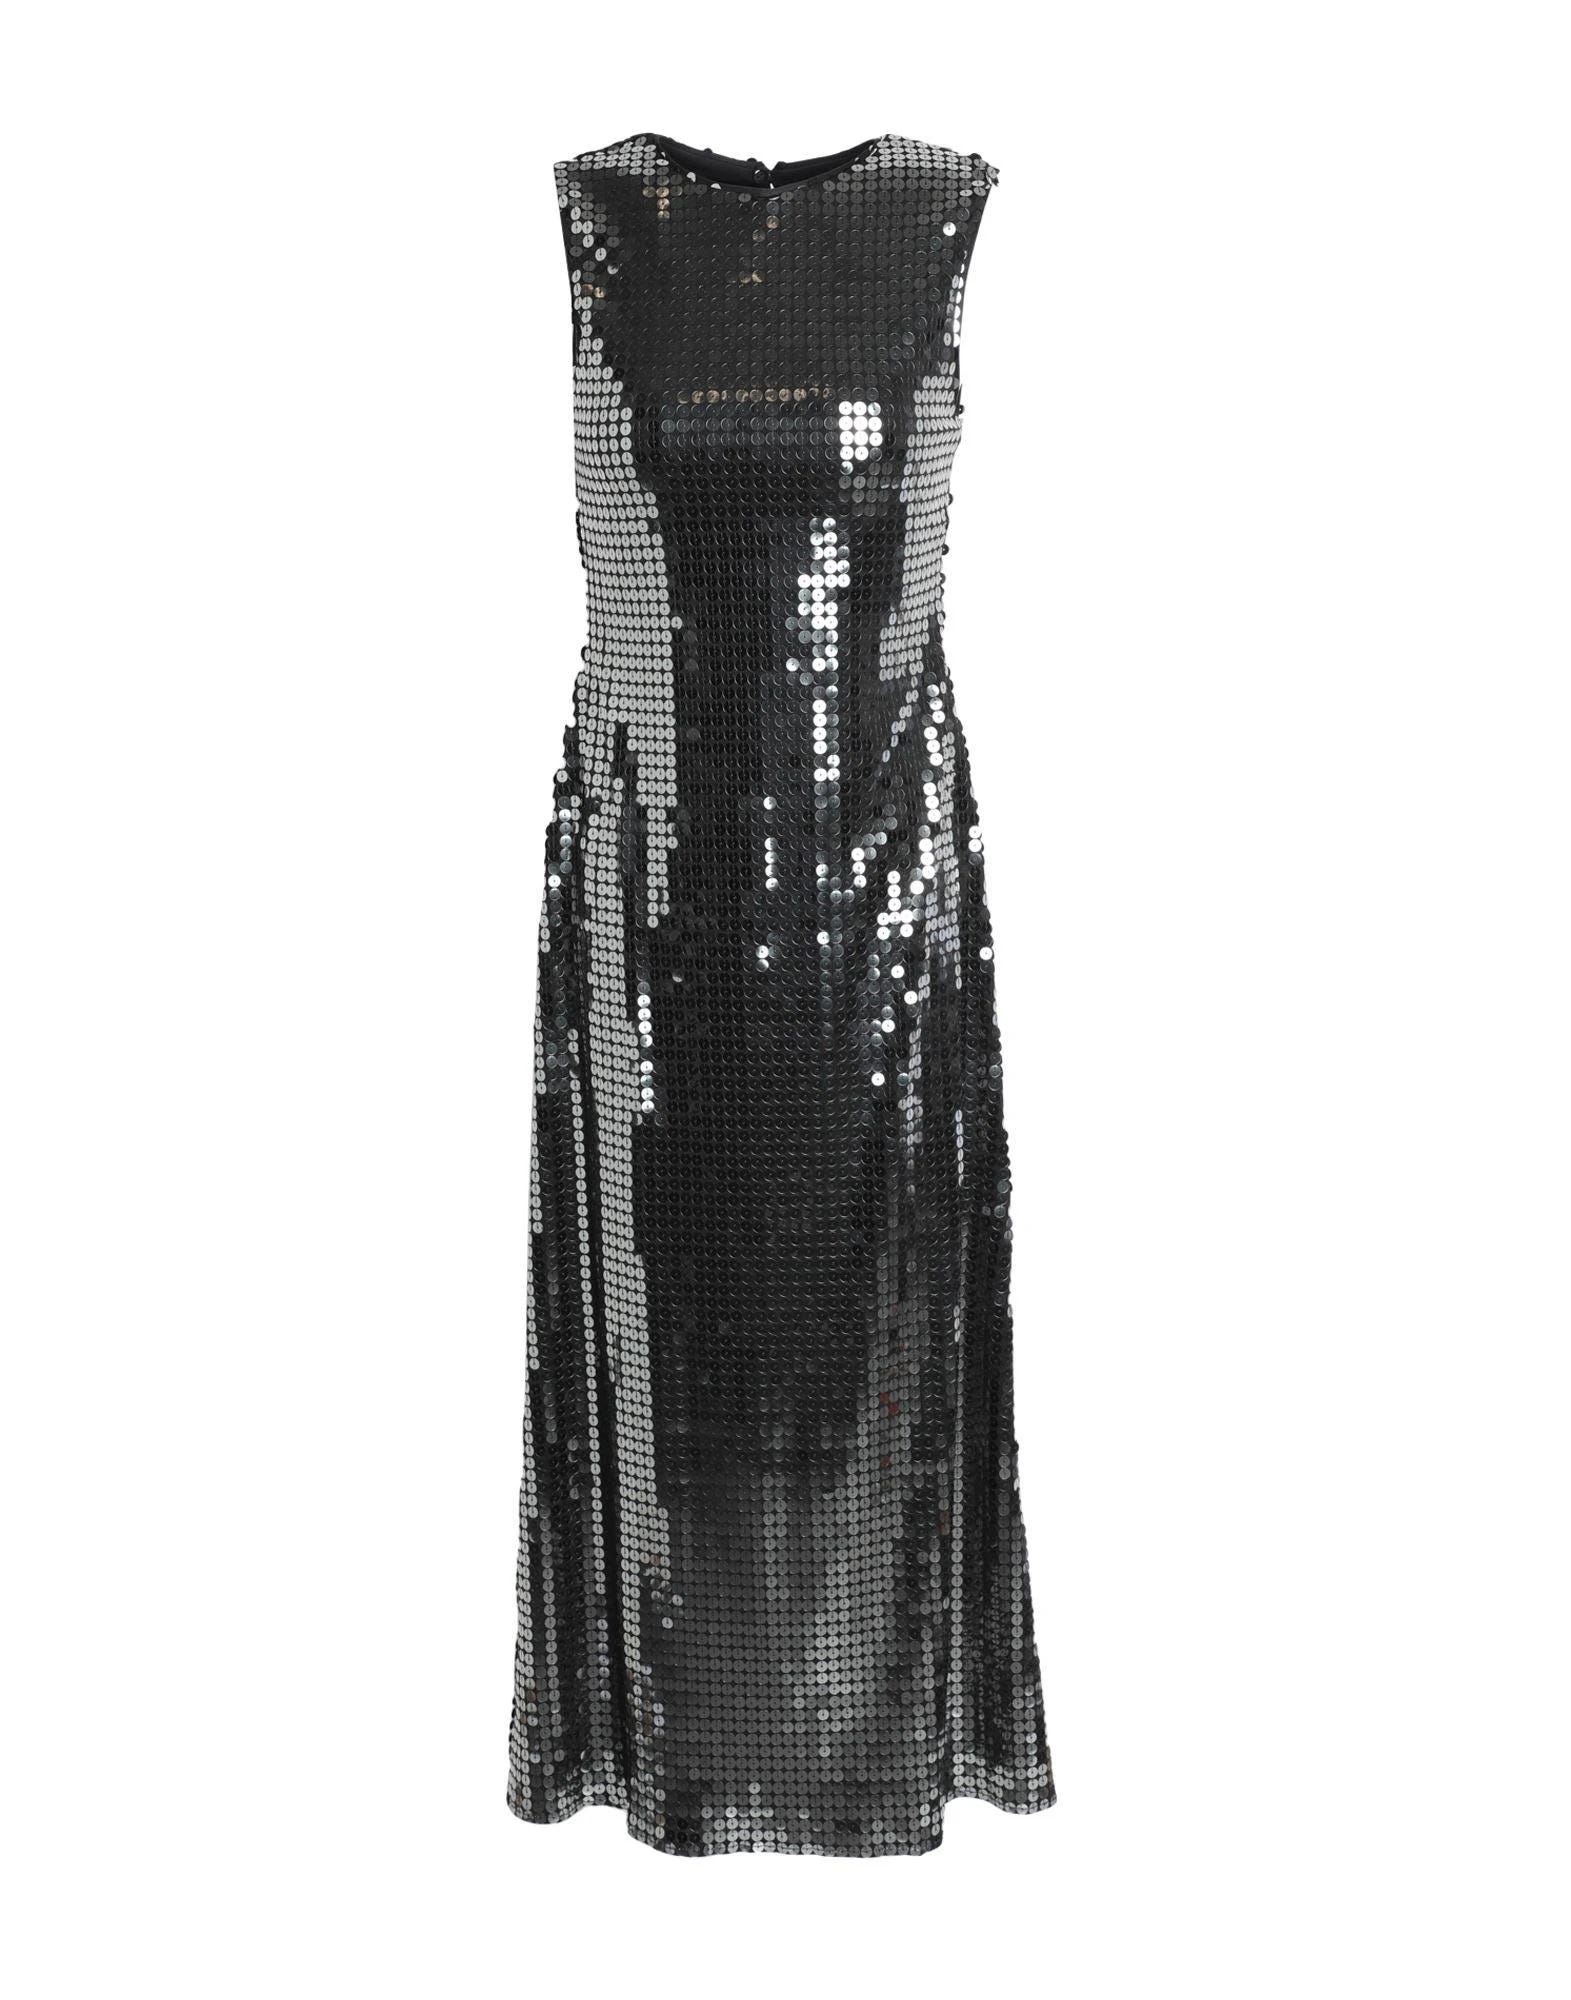 Dazzling Silver Chrome Disco Midi Dress for a Sparkling Night Out | Image